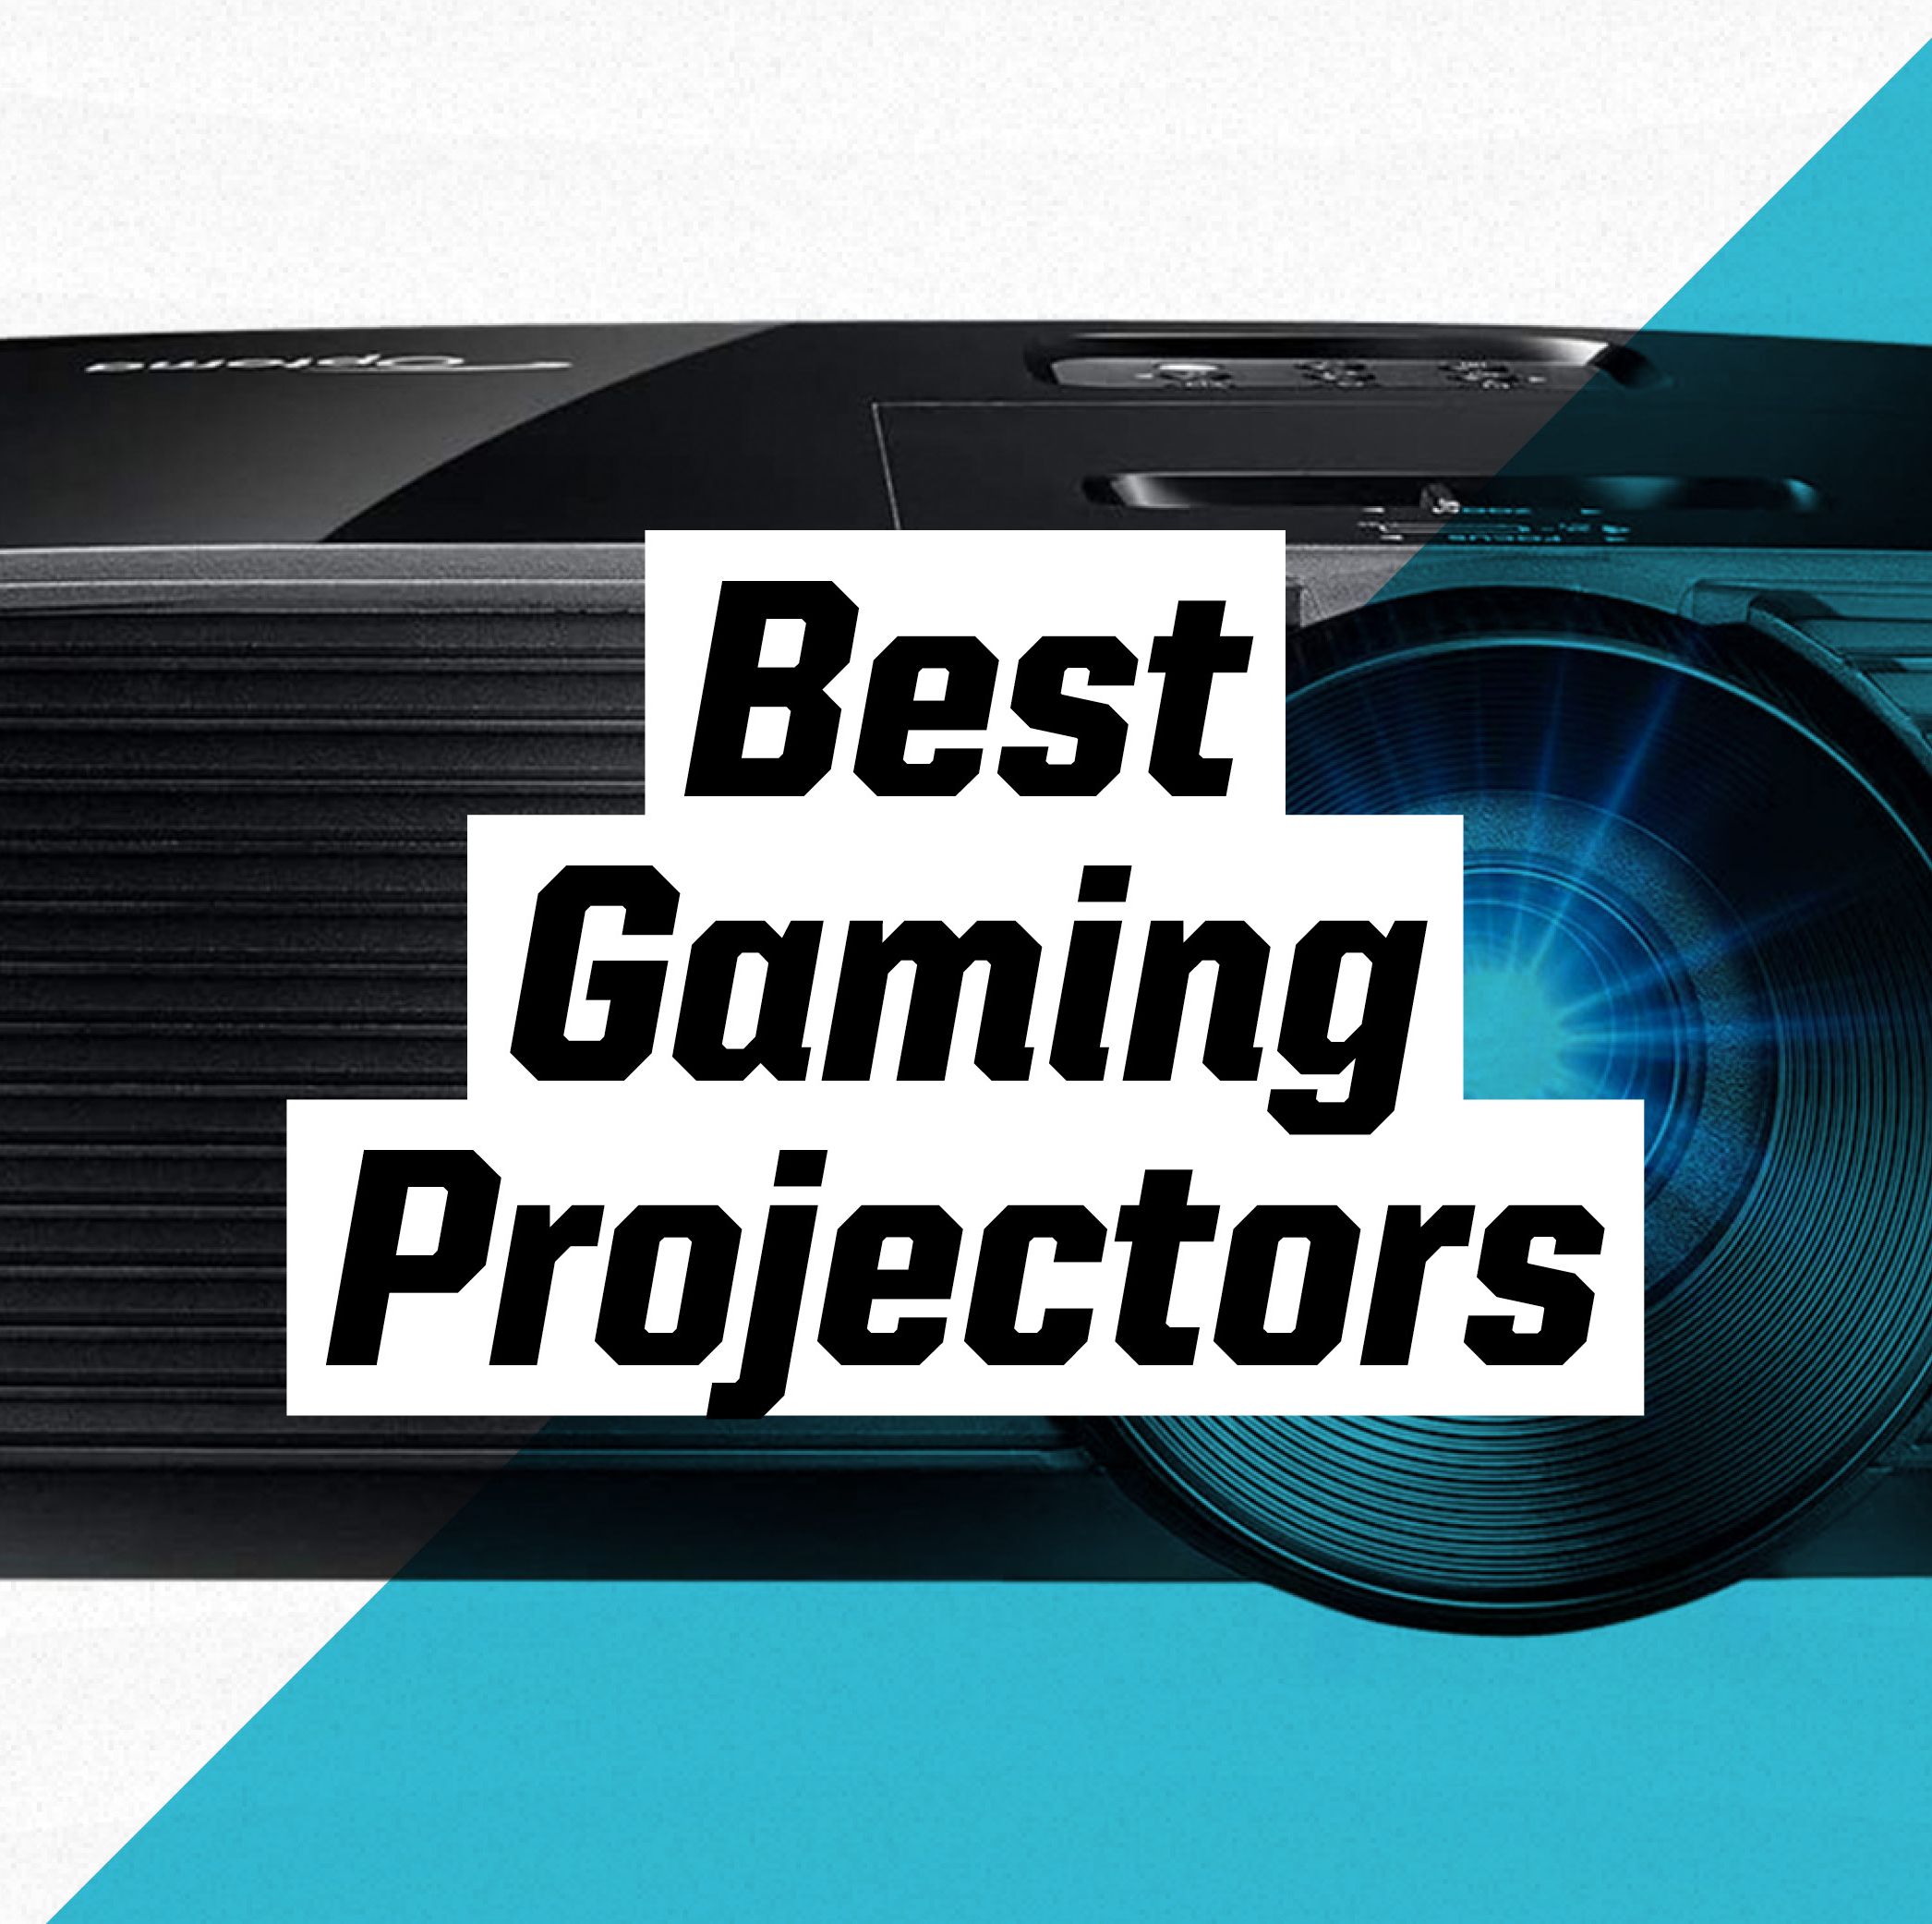 The Best Gaming Projectors You Can Buy